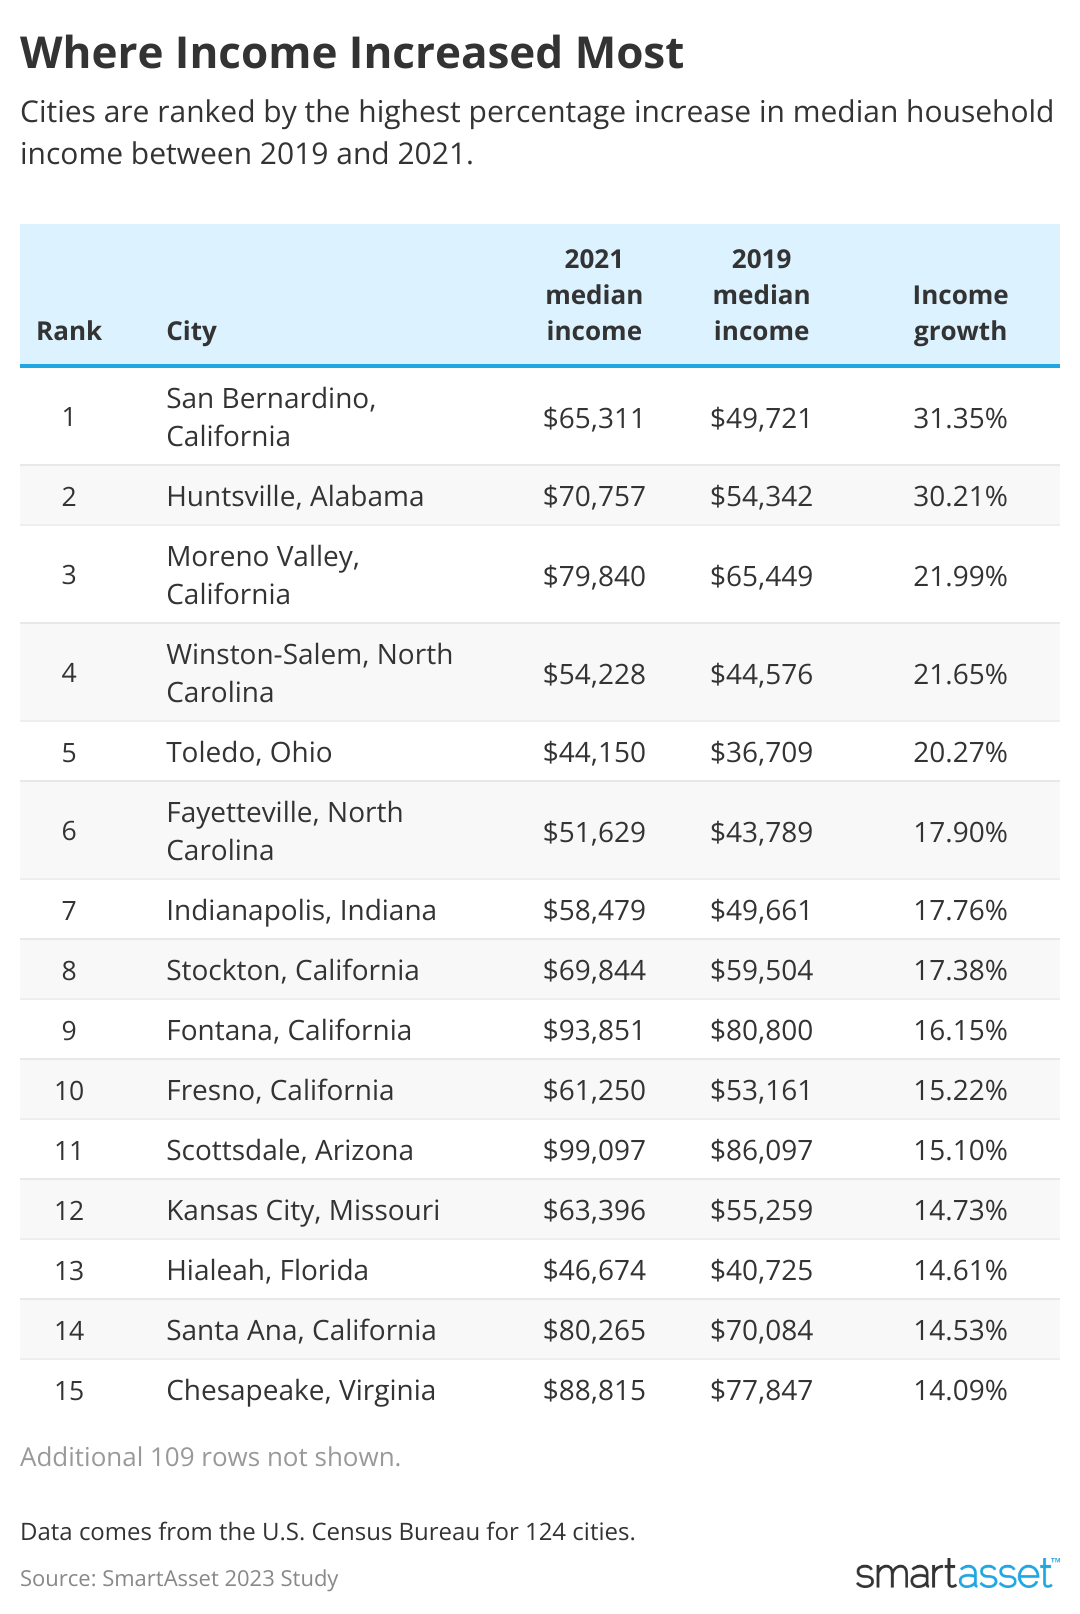 A chart of the top 15 cities where income has increased most